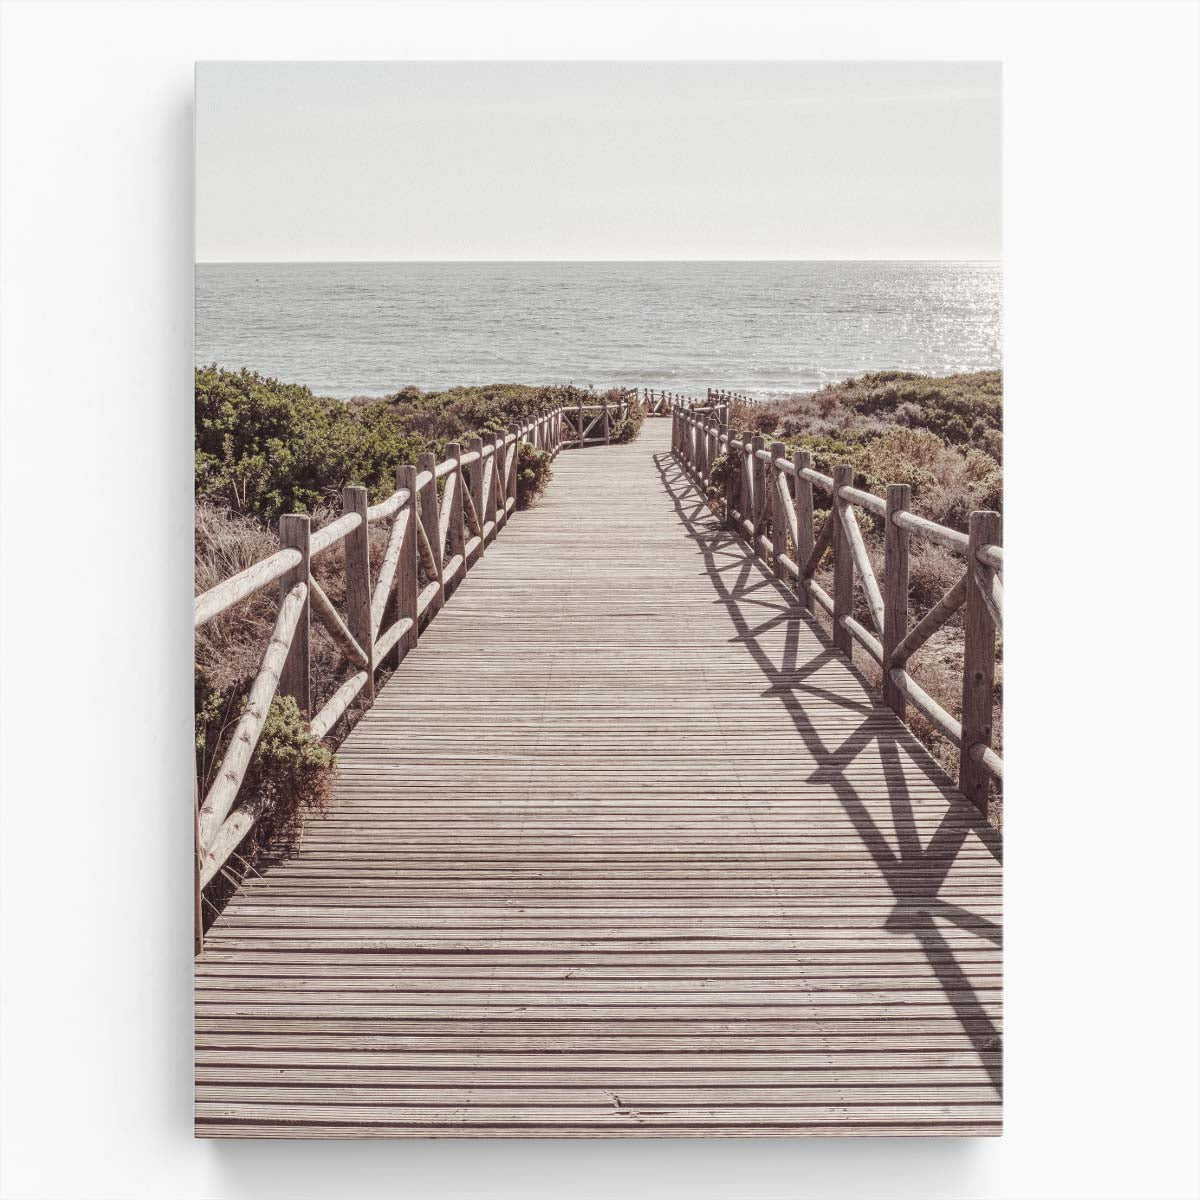 Coastal Landscape Photography Wooden Boardwalk Sea Perspective Artwork by Luxuriance Designs, made in USA